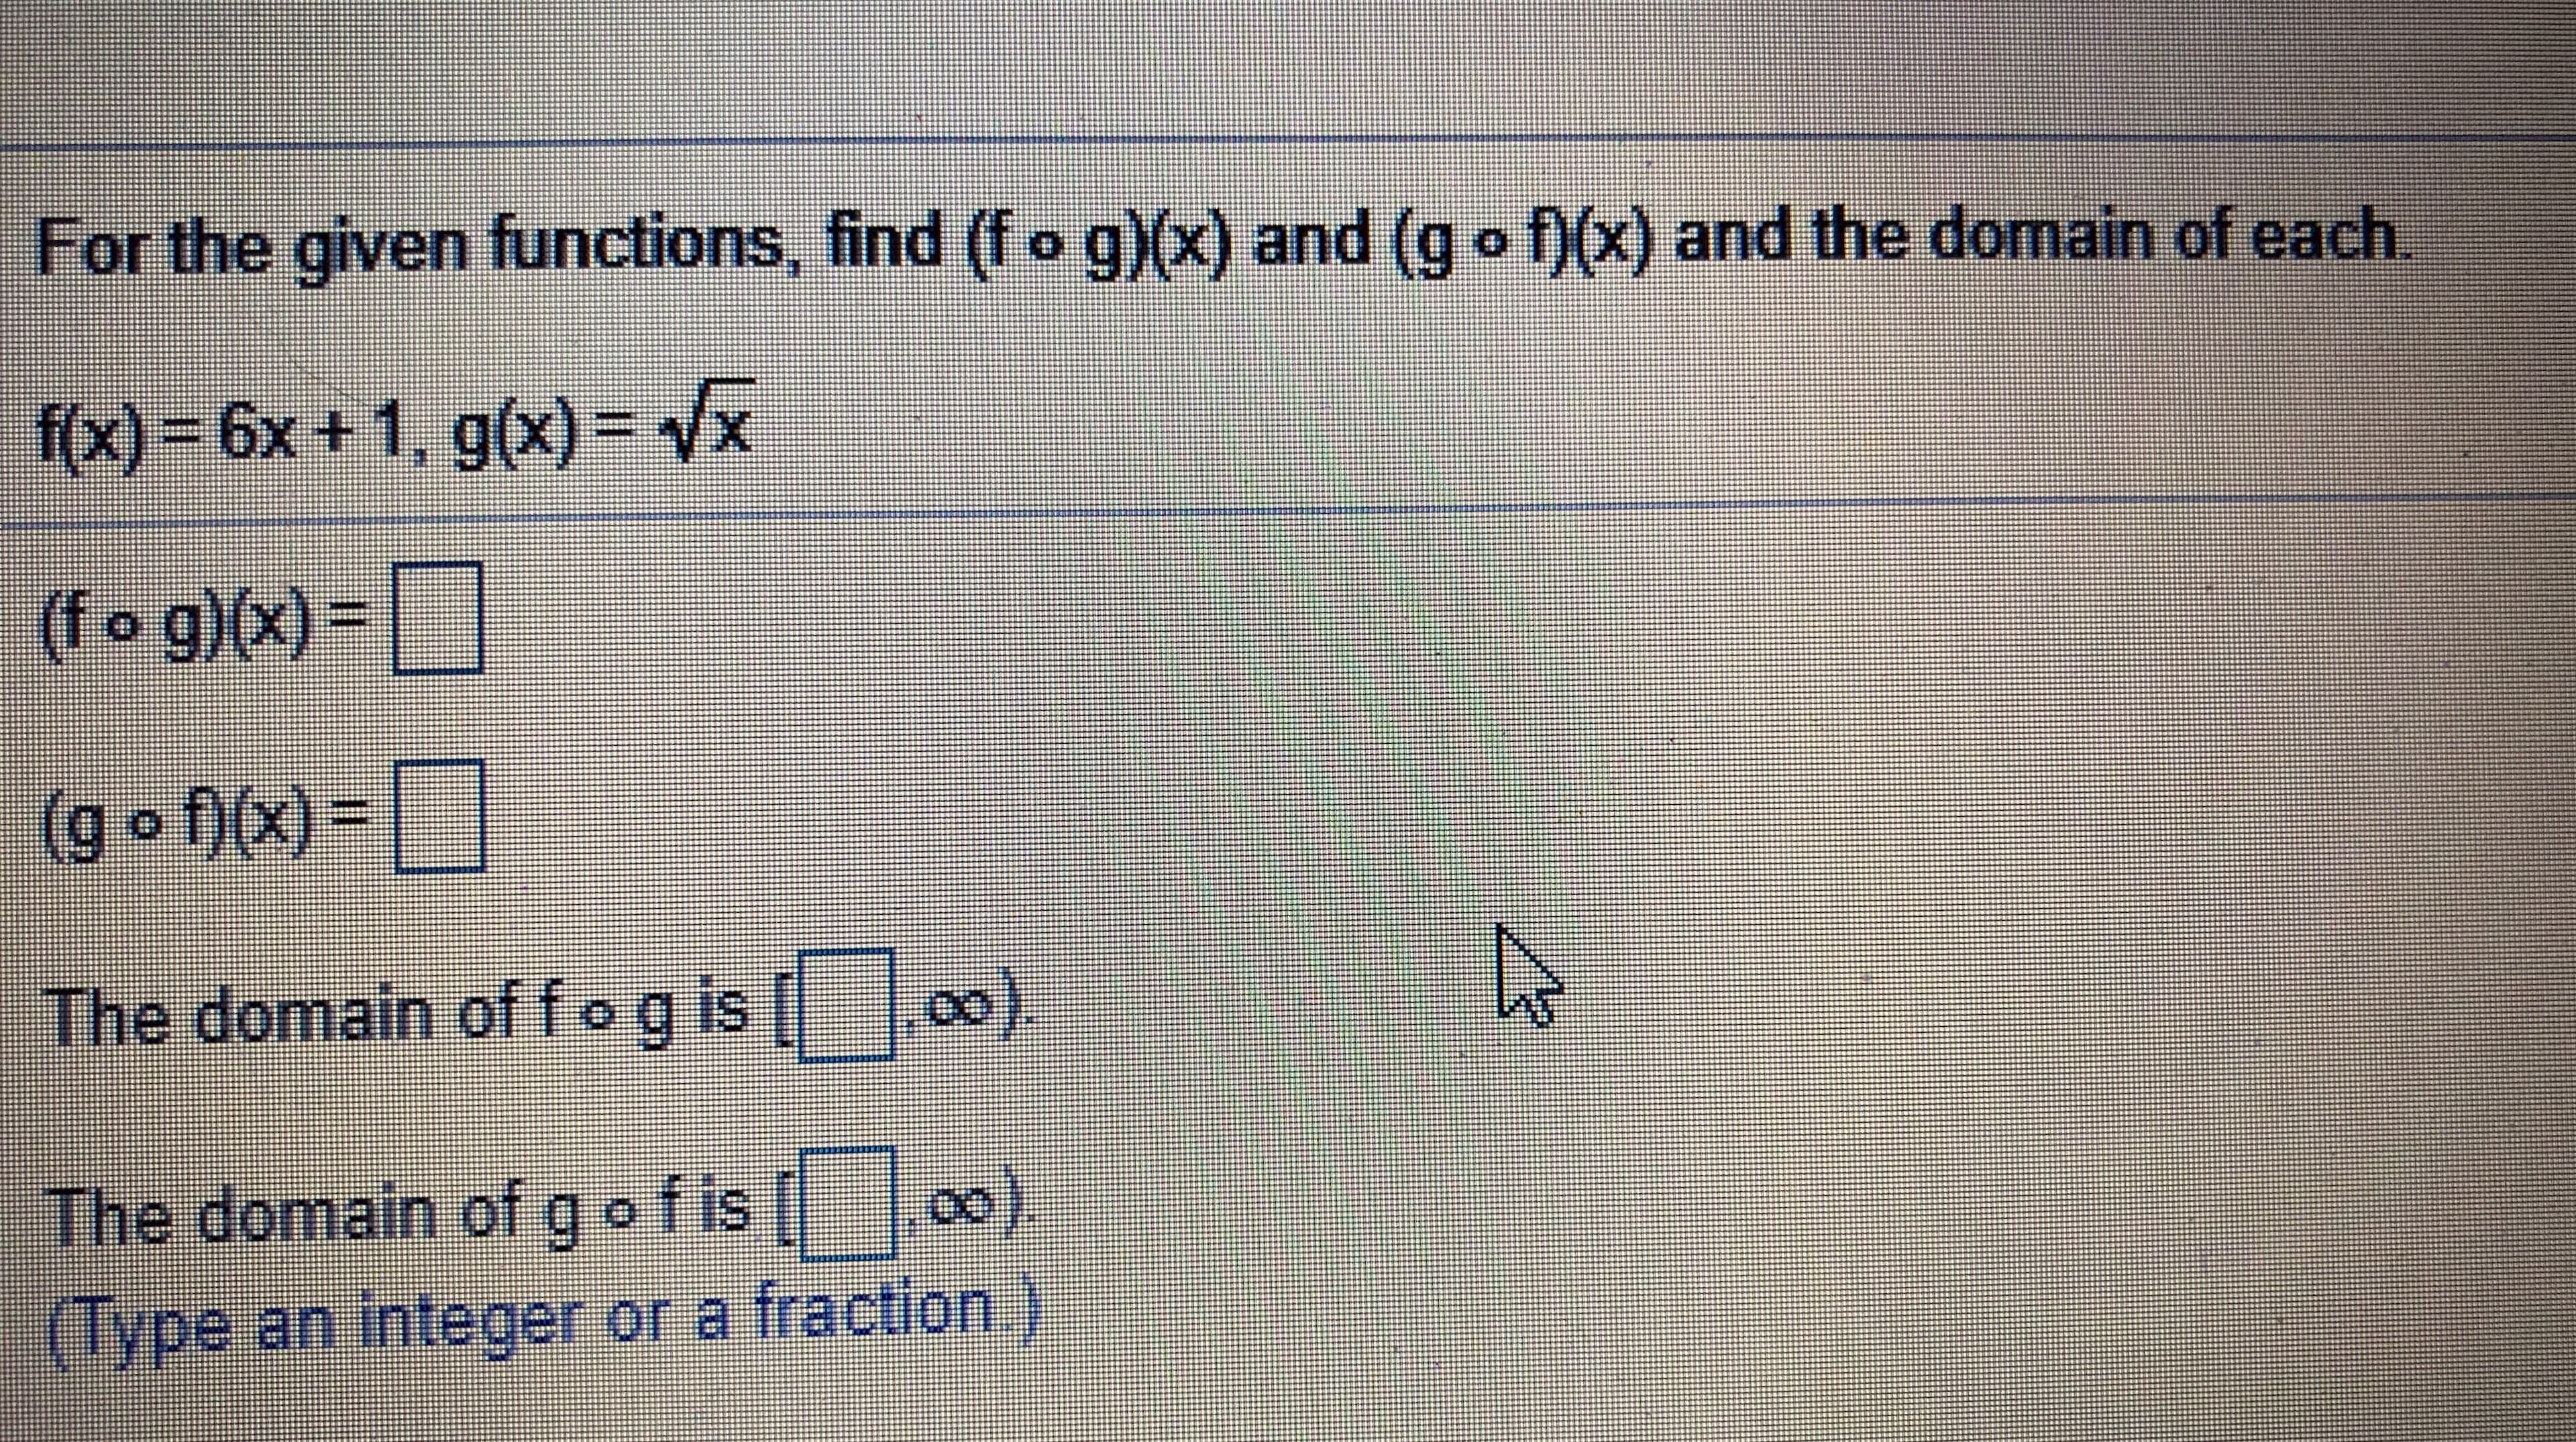 For the given functions, find (fo g)(x) and (g-n(x) and the domain of each
f(x) = 6x + 1, g(x)=
The domain of foo is l|ー100)
The domain of g ofis
00).
geraction
